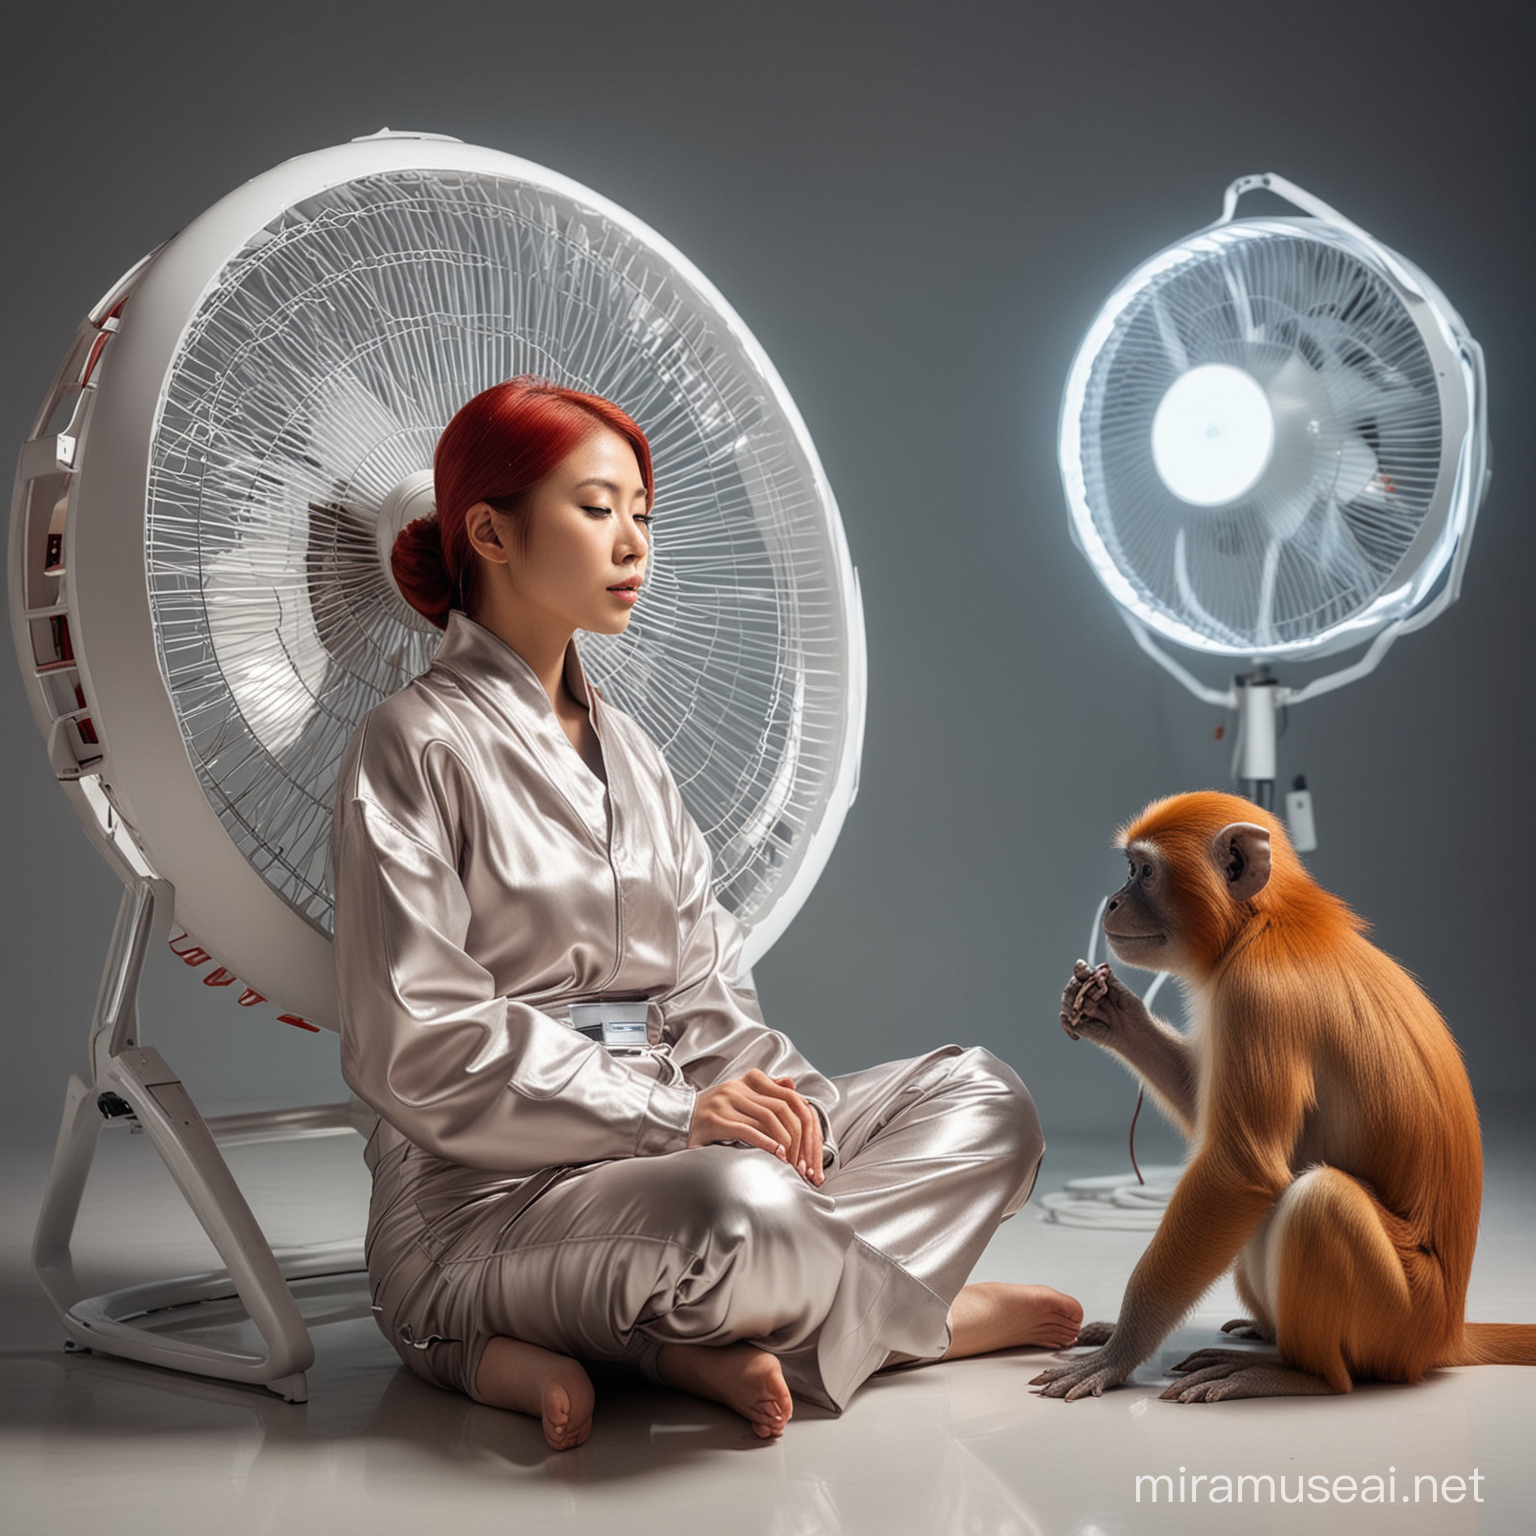 Asian woman with red hair wearing a futuristic outfit relaxing in the airflow from a fan after a hard day of working accompanied by a small monkey with similar outfit